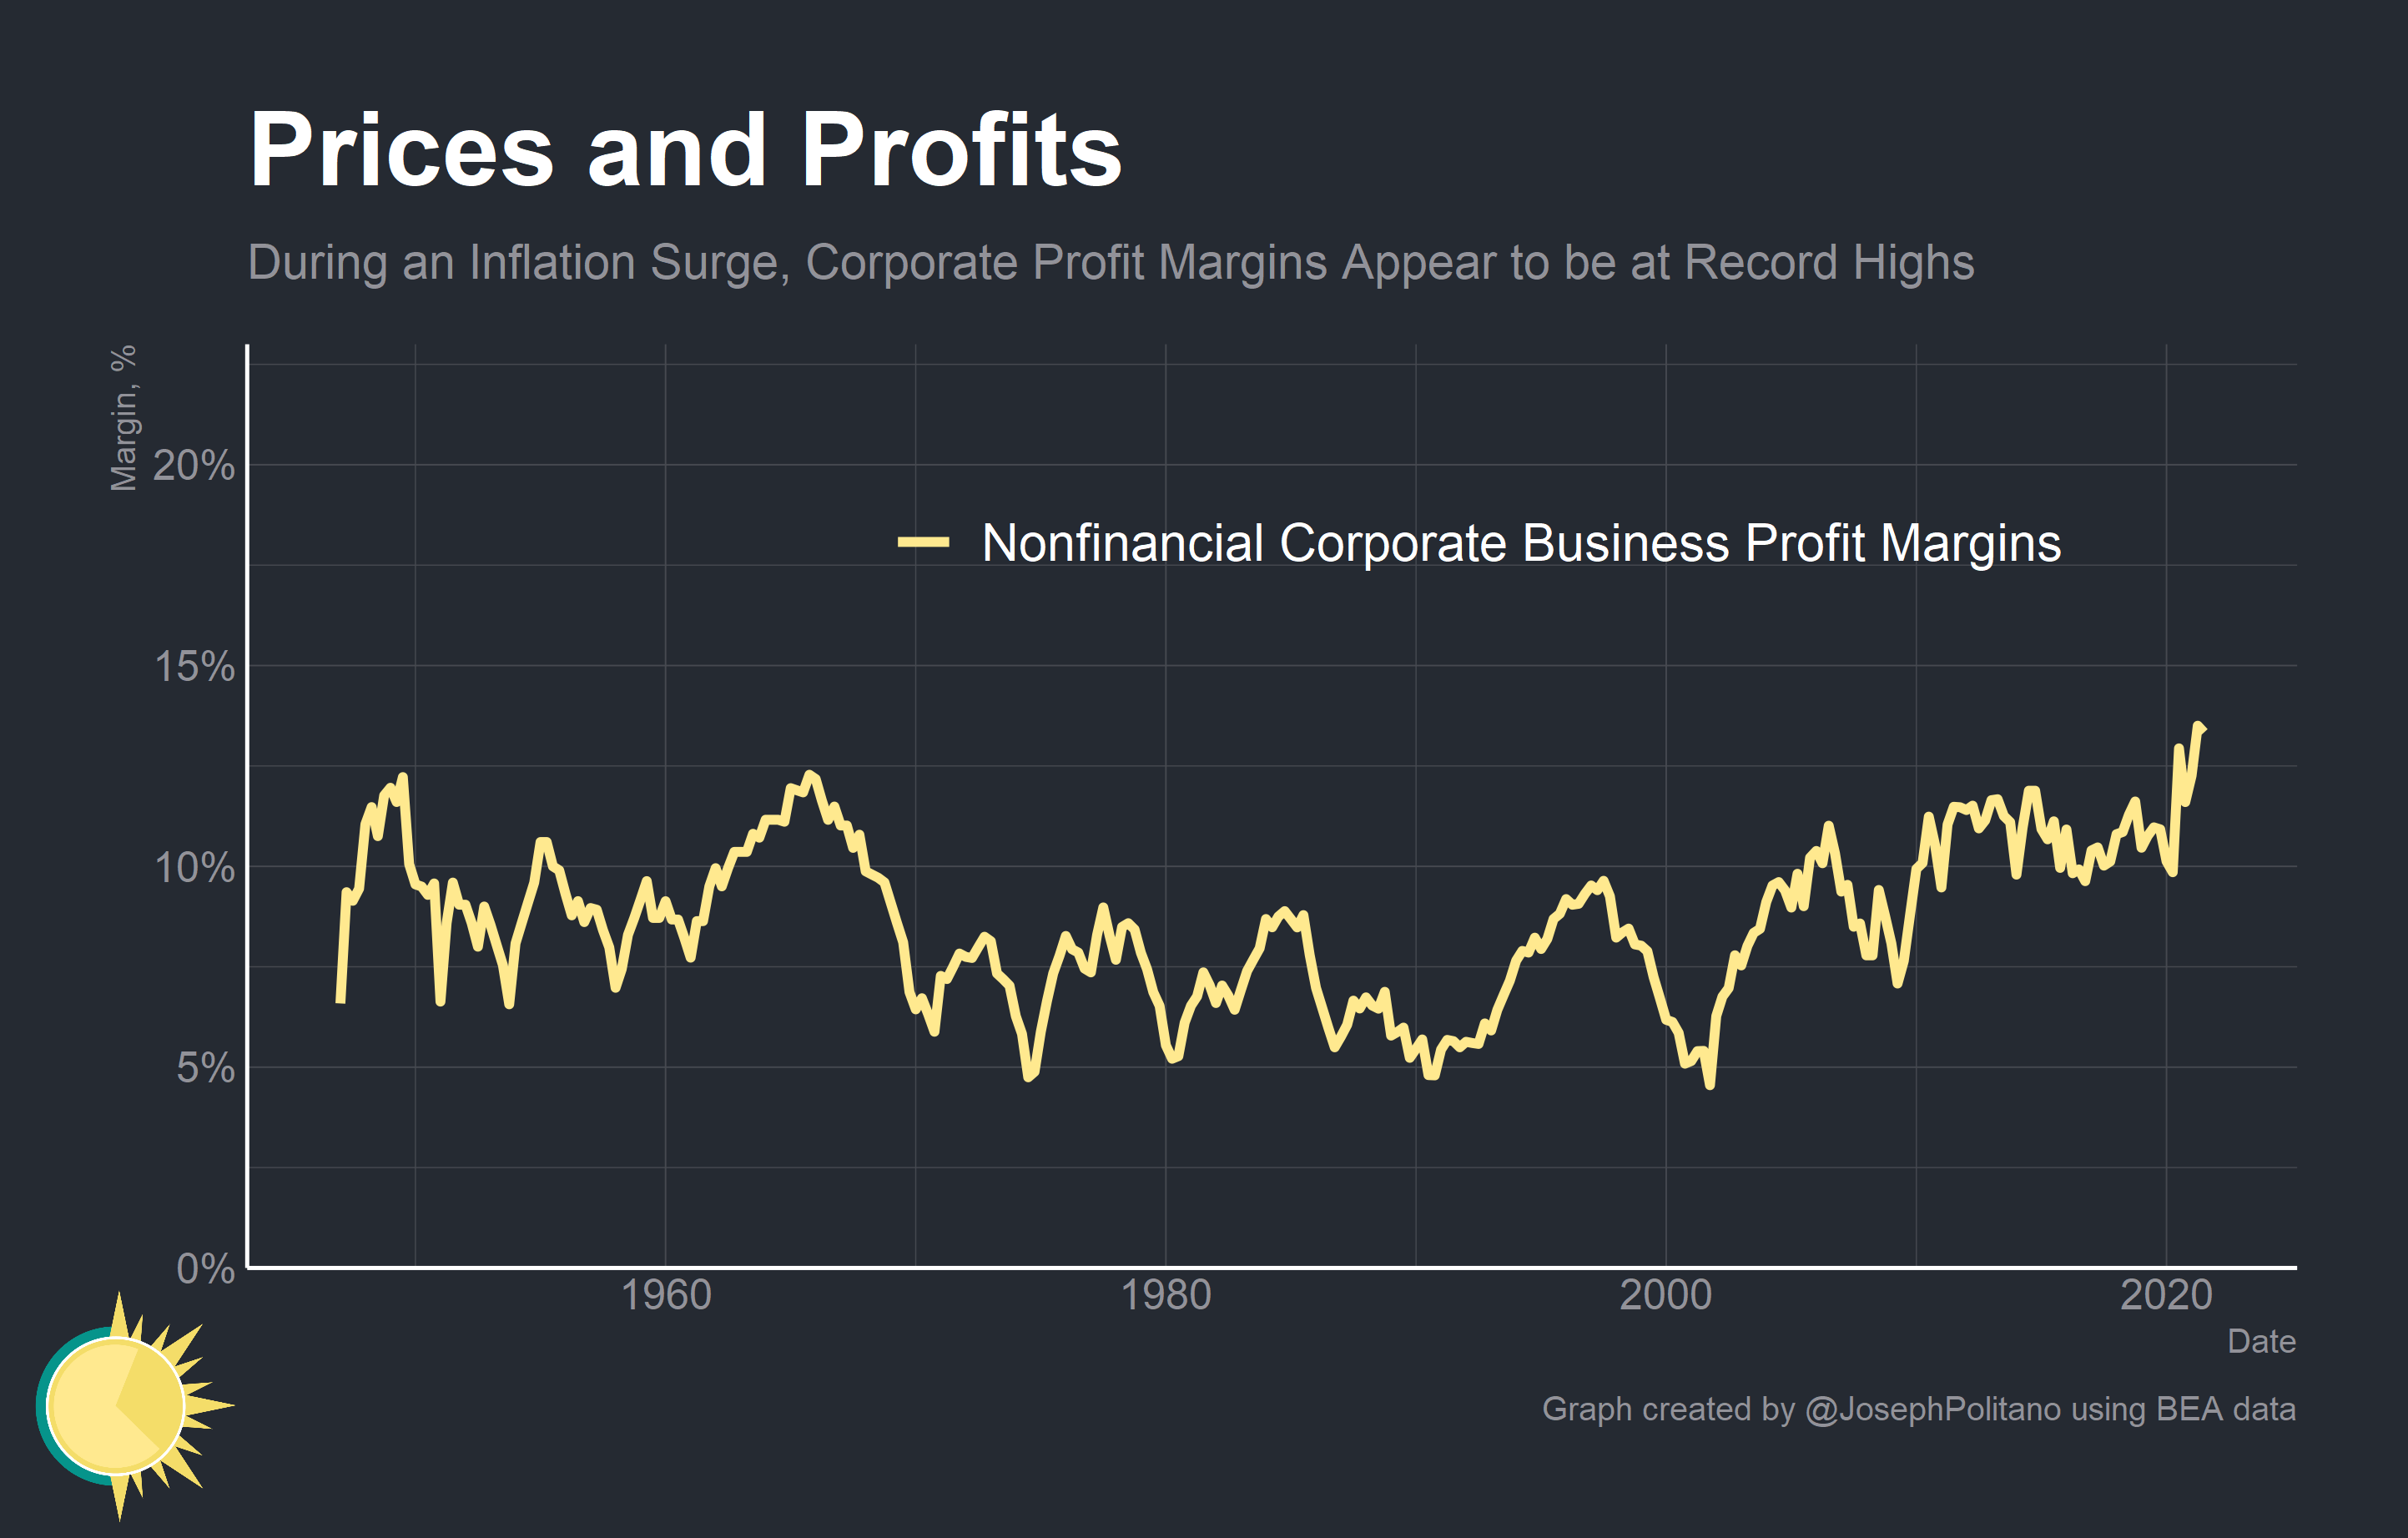 Are Rising Corporate Profit Margins Causing Inflation?